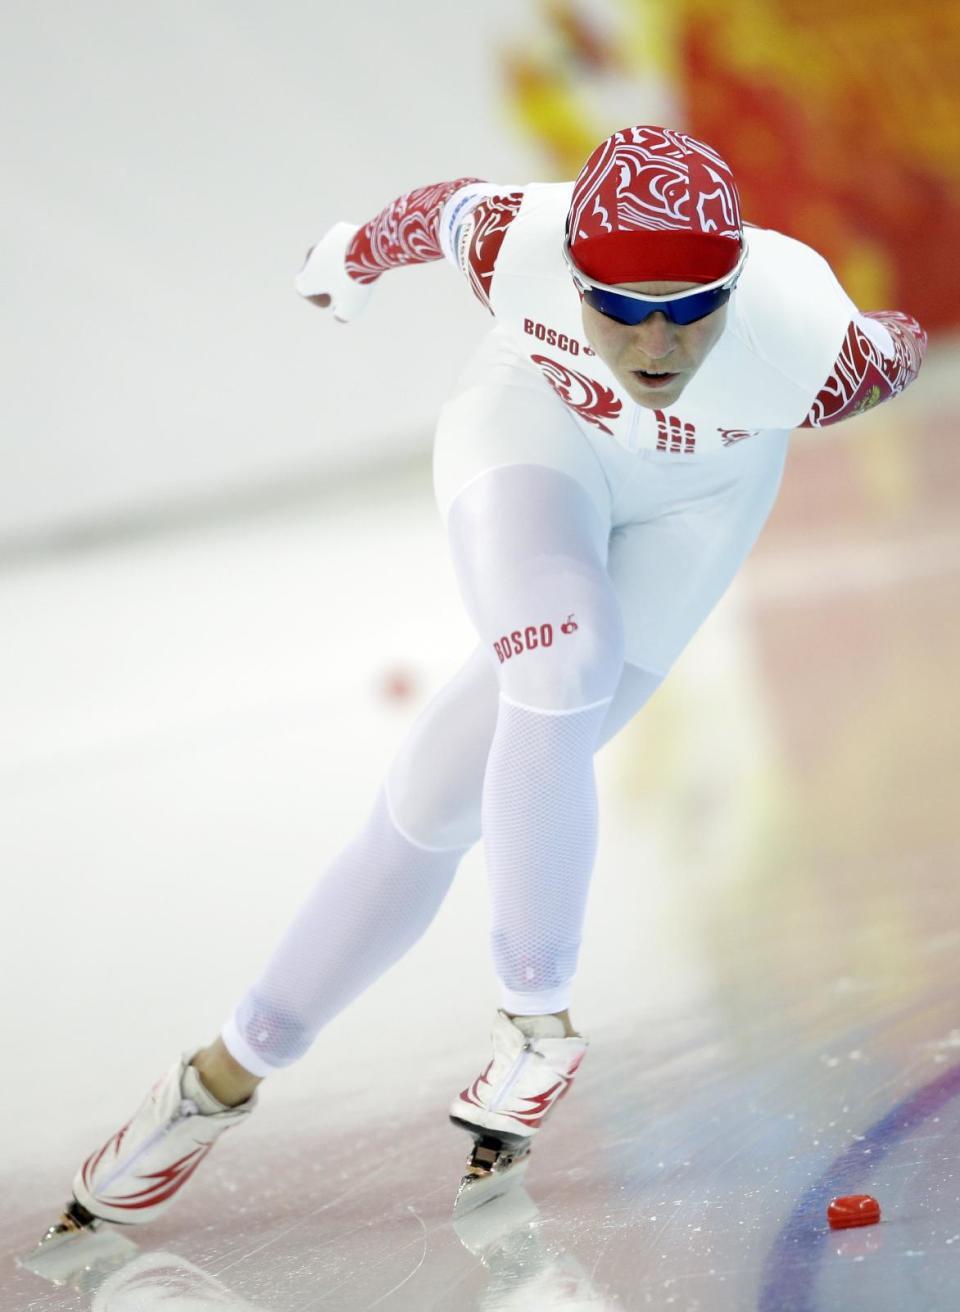 Russia's Olga Graf competes in the women's 3,000-meter speedskating race at the Adler Arena Skating Center during the 2014 Winter Olympics, Sunday, Feb. 9, 2014, in Sochi, Russia. (AP Photo/Patrick Semansky)